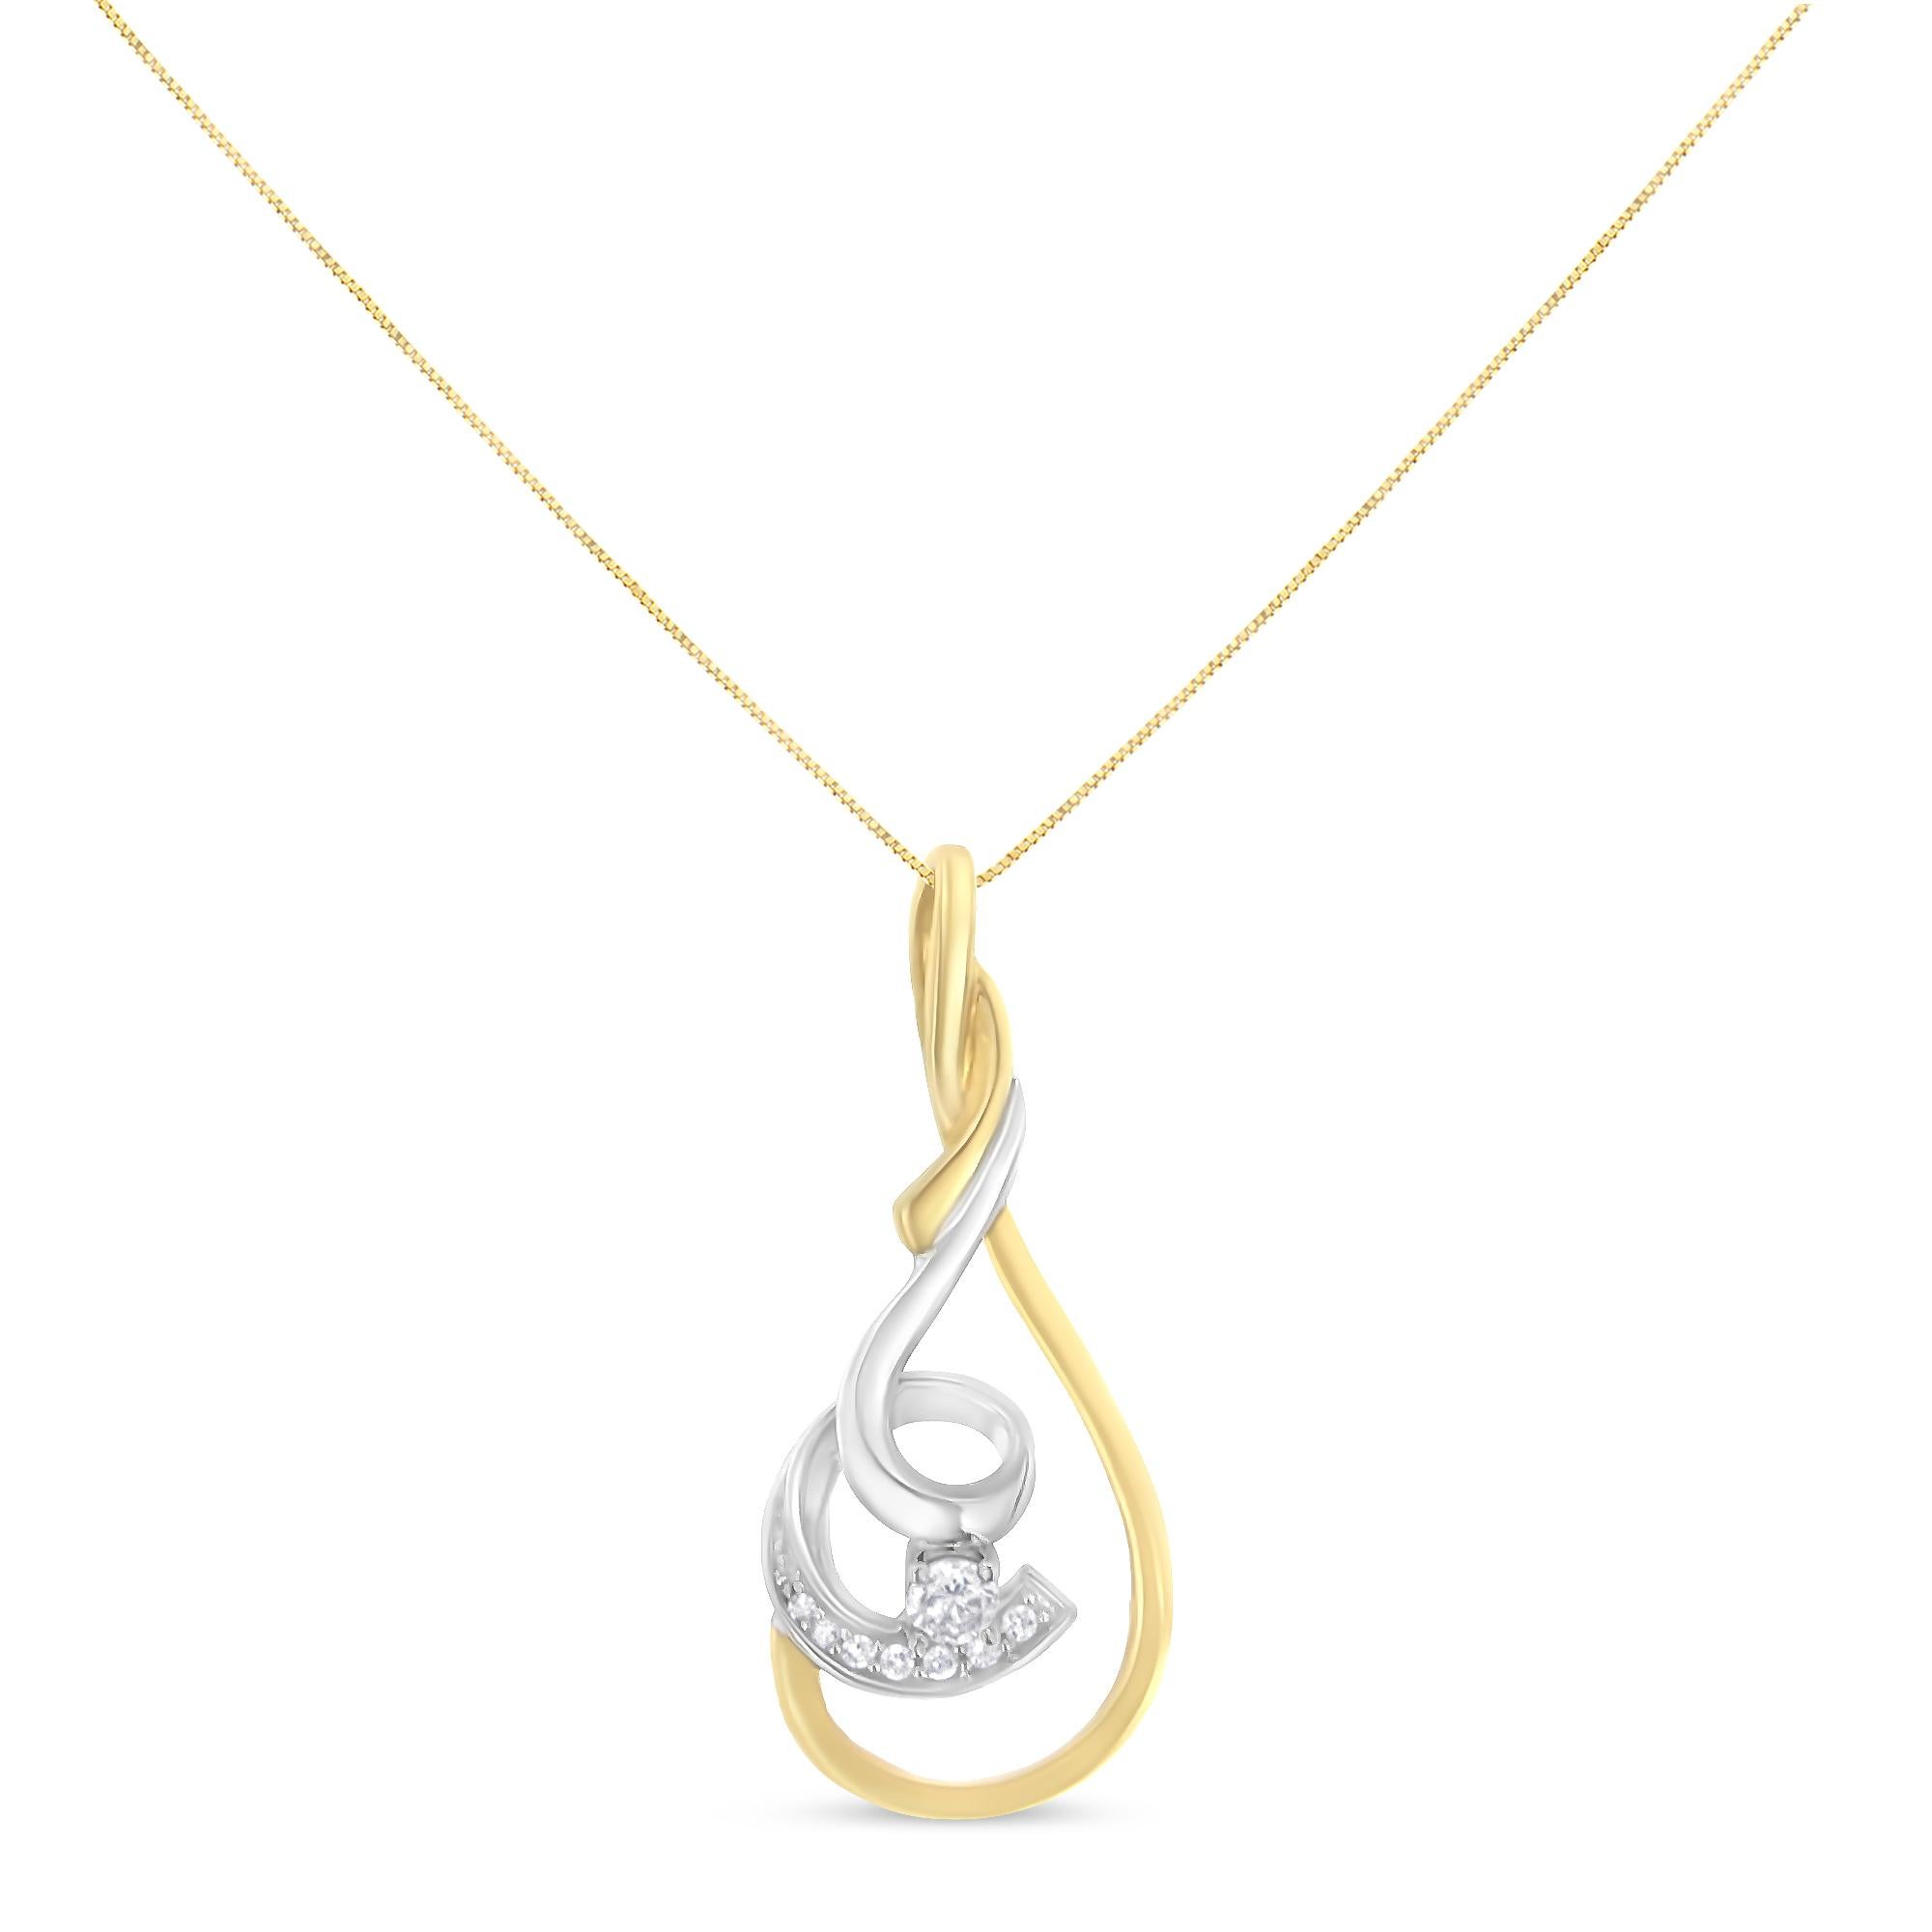 This ring has a chic appeal that will make you stand out from the crowd. It features a wide outer ring, which is elegantly surrounded by the cascade of spirals inside. The classic pendant is composed of two-toned 10Kt white and yellow gold. Further,